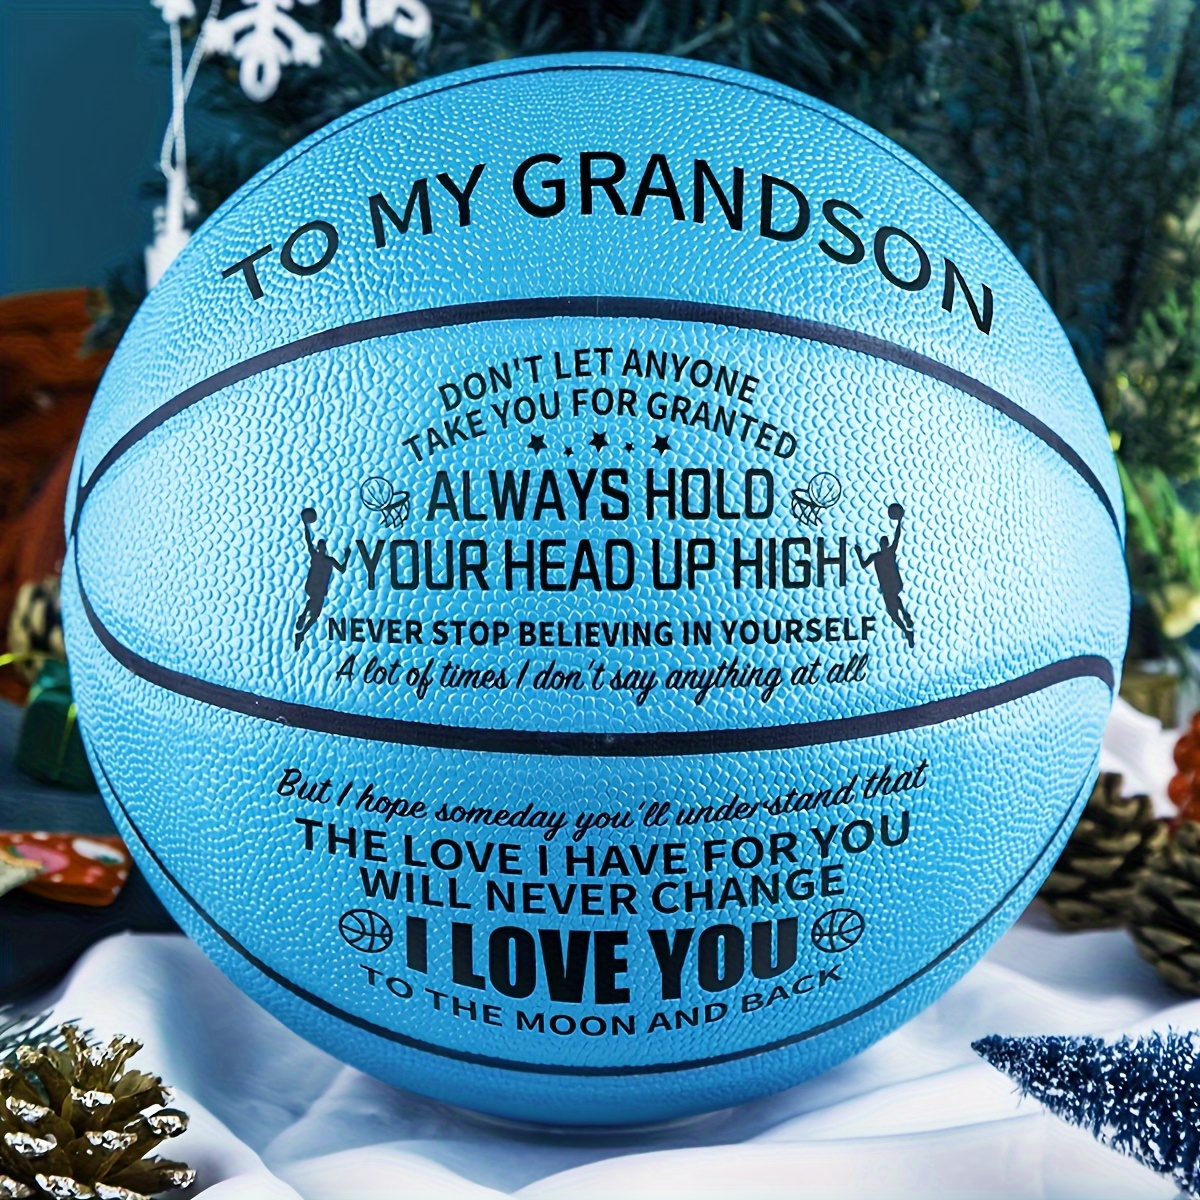 

1pc Creative Basketball For Grandson - Perfect Gift, International Standard Size (without A Pump)